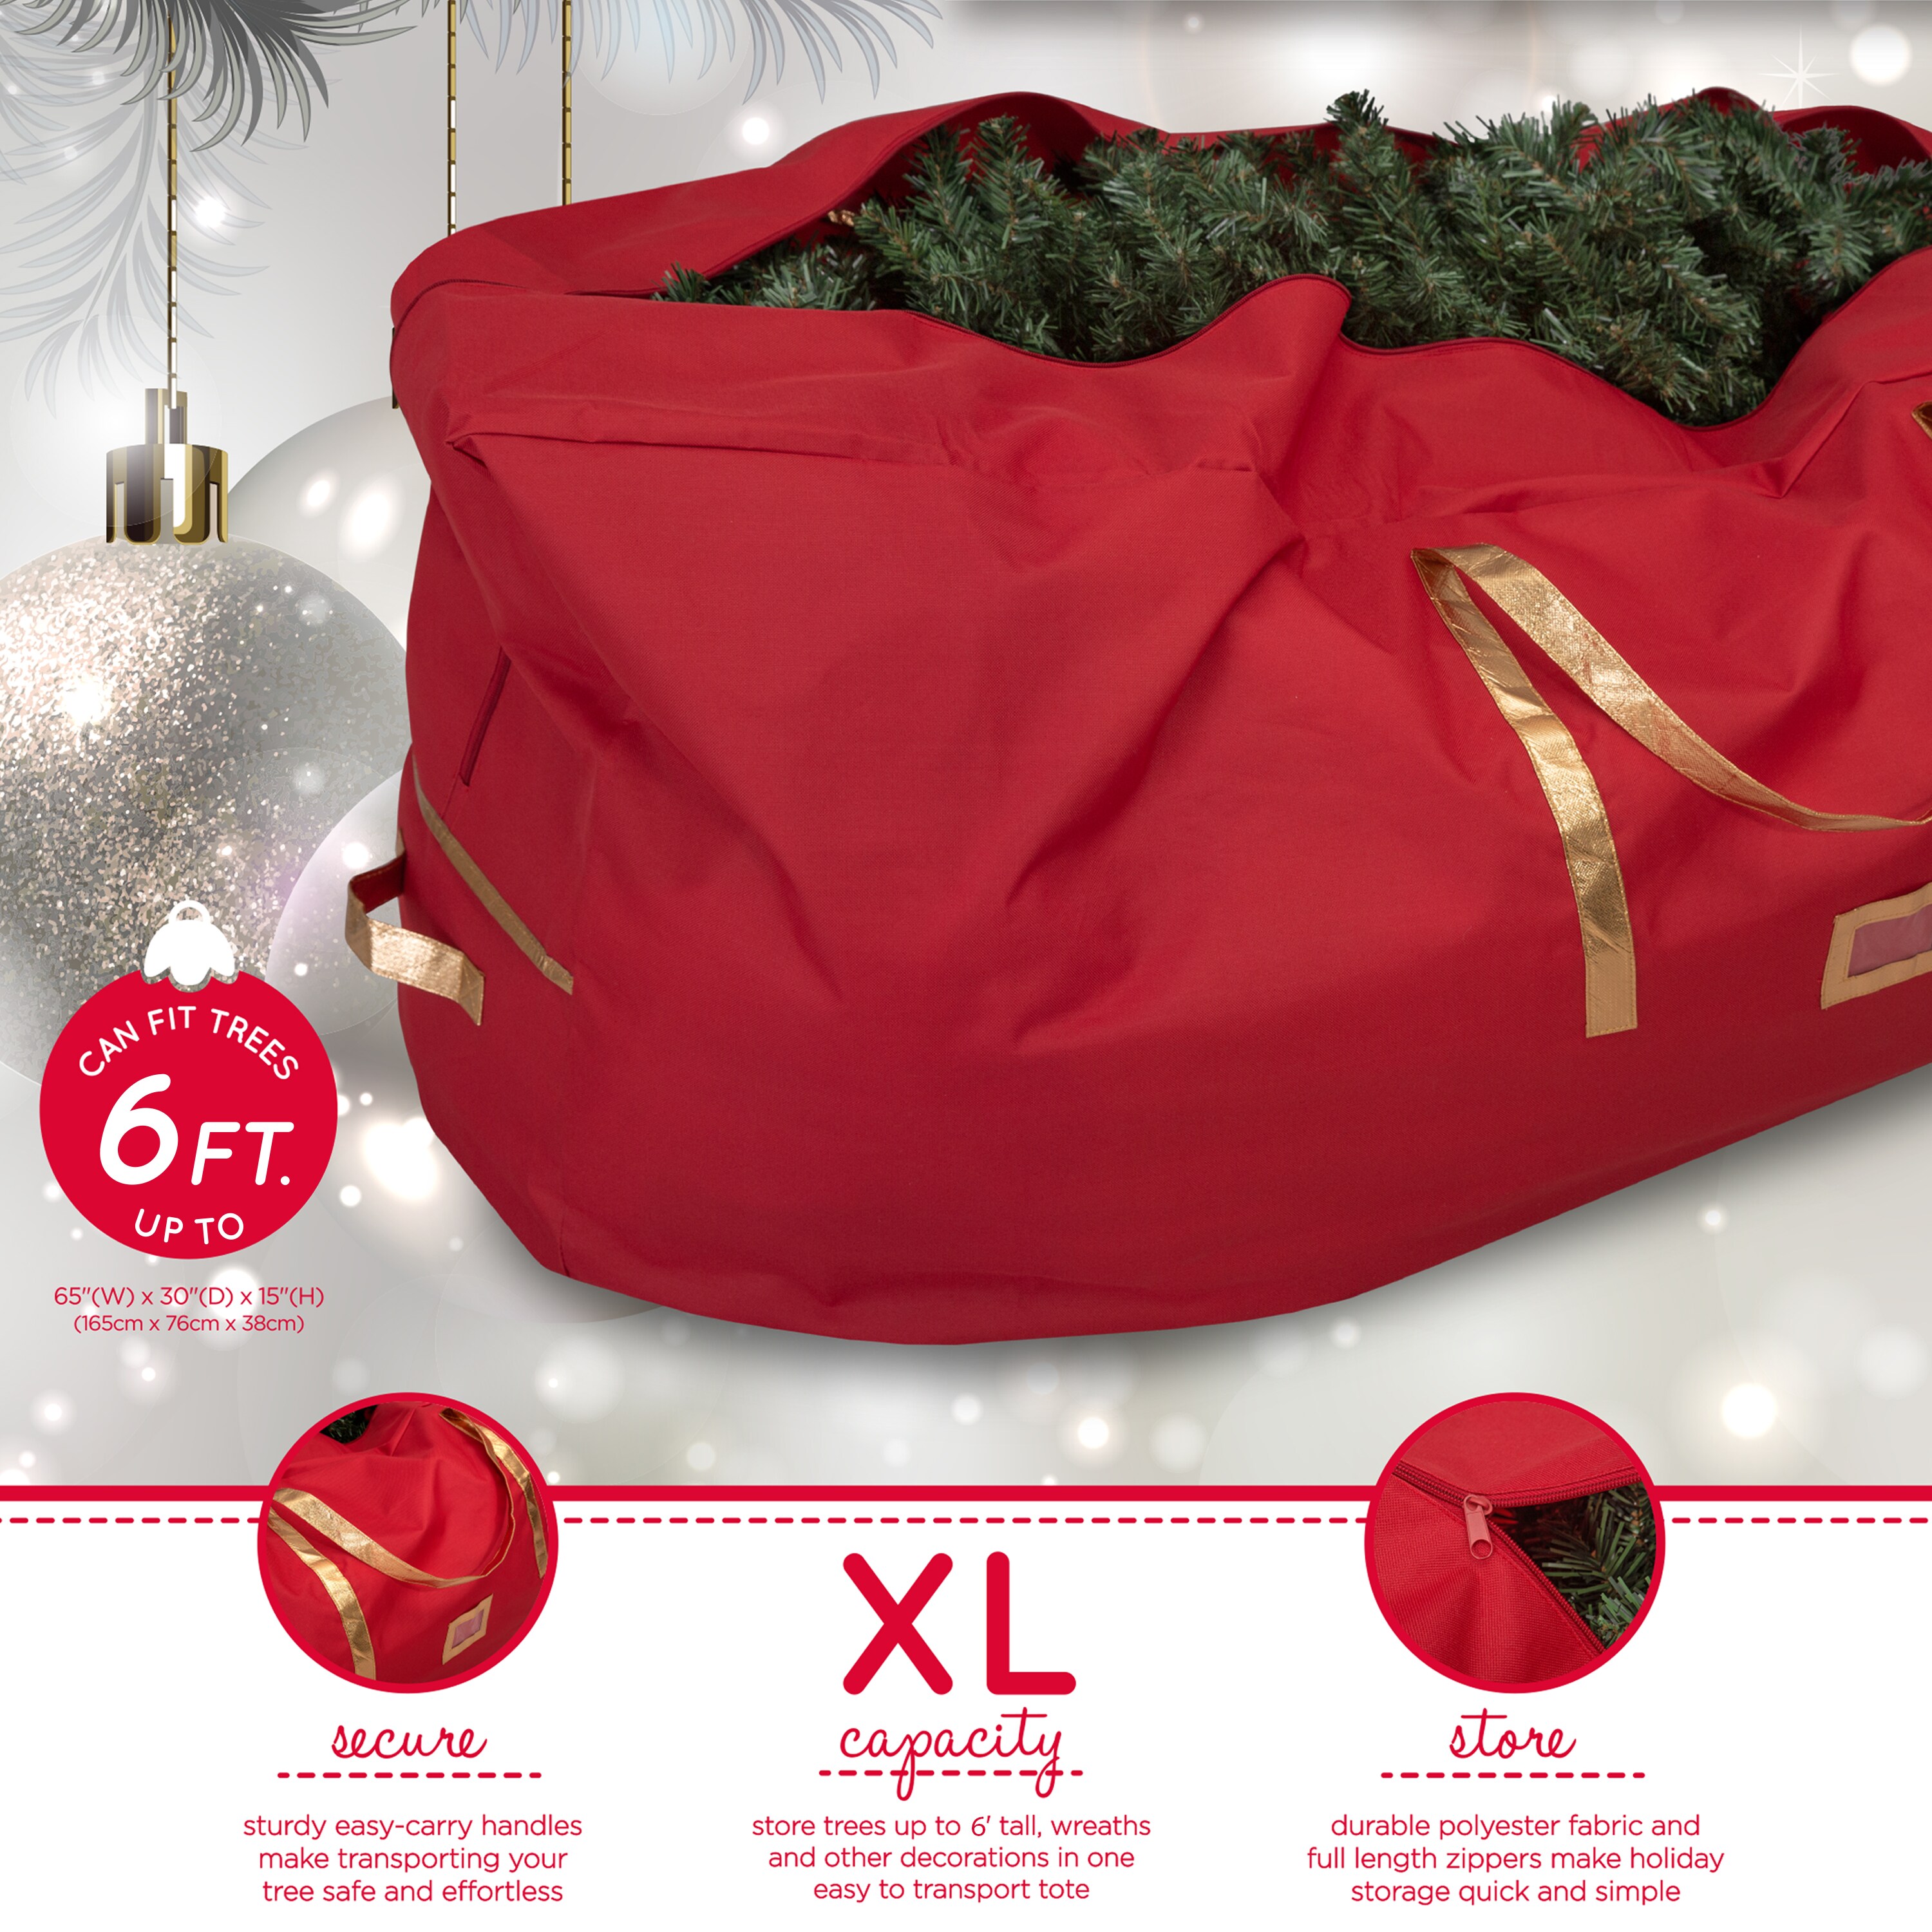 Rubbermaid 30 WREATH STORAGE BAG Portable With Zipper and Handle